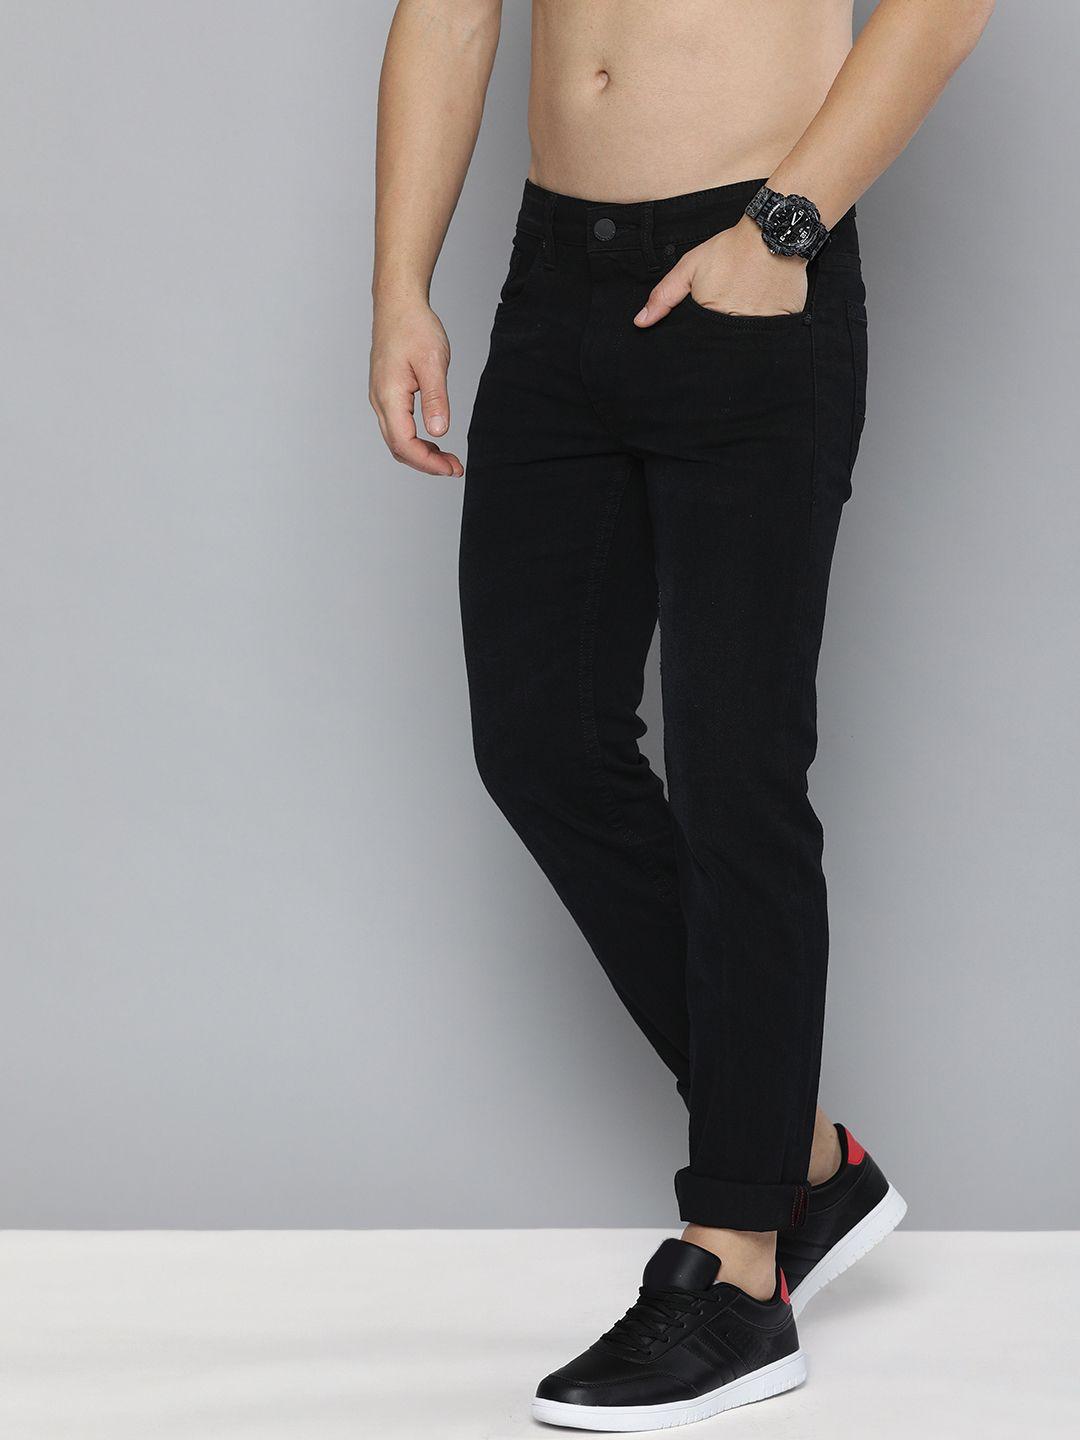 here&now men black slim fit mid-rise low distress stretchable jeans